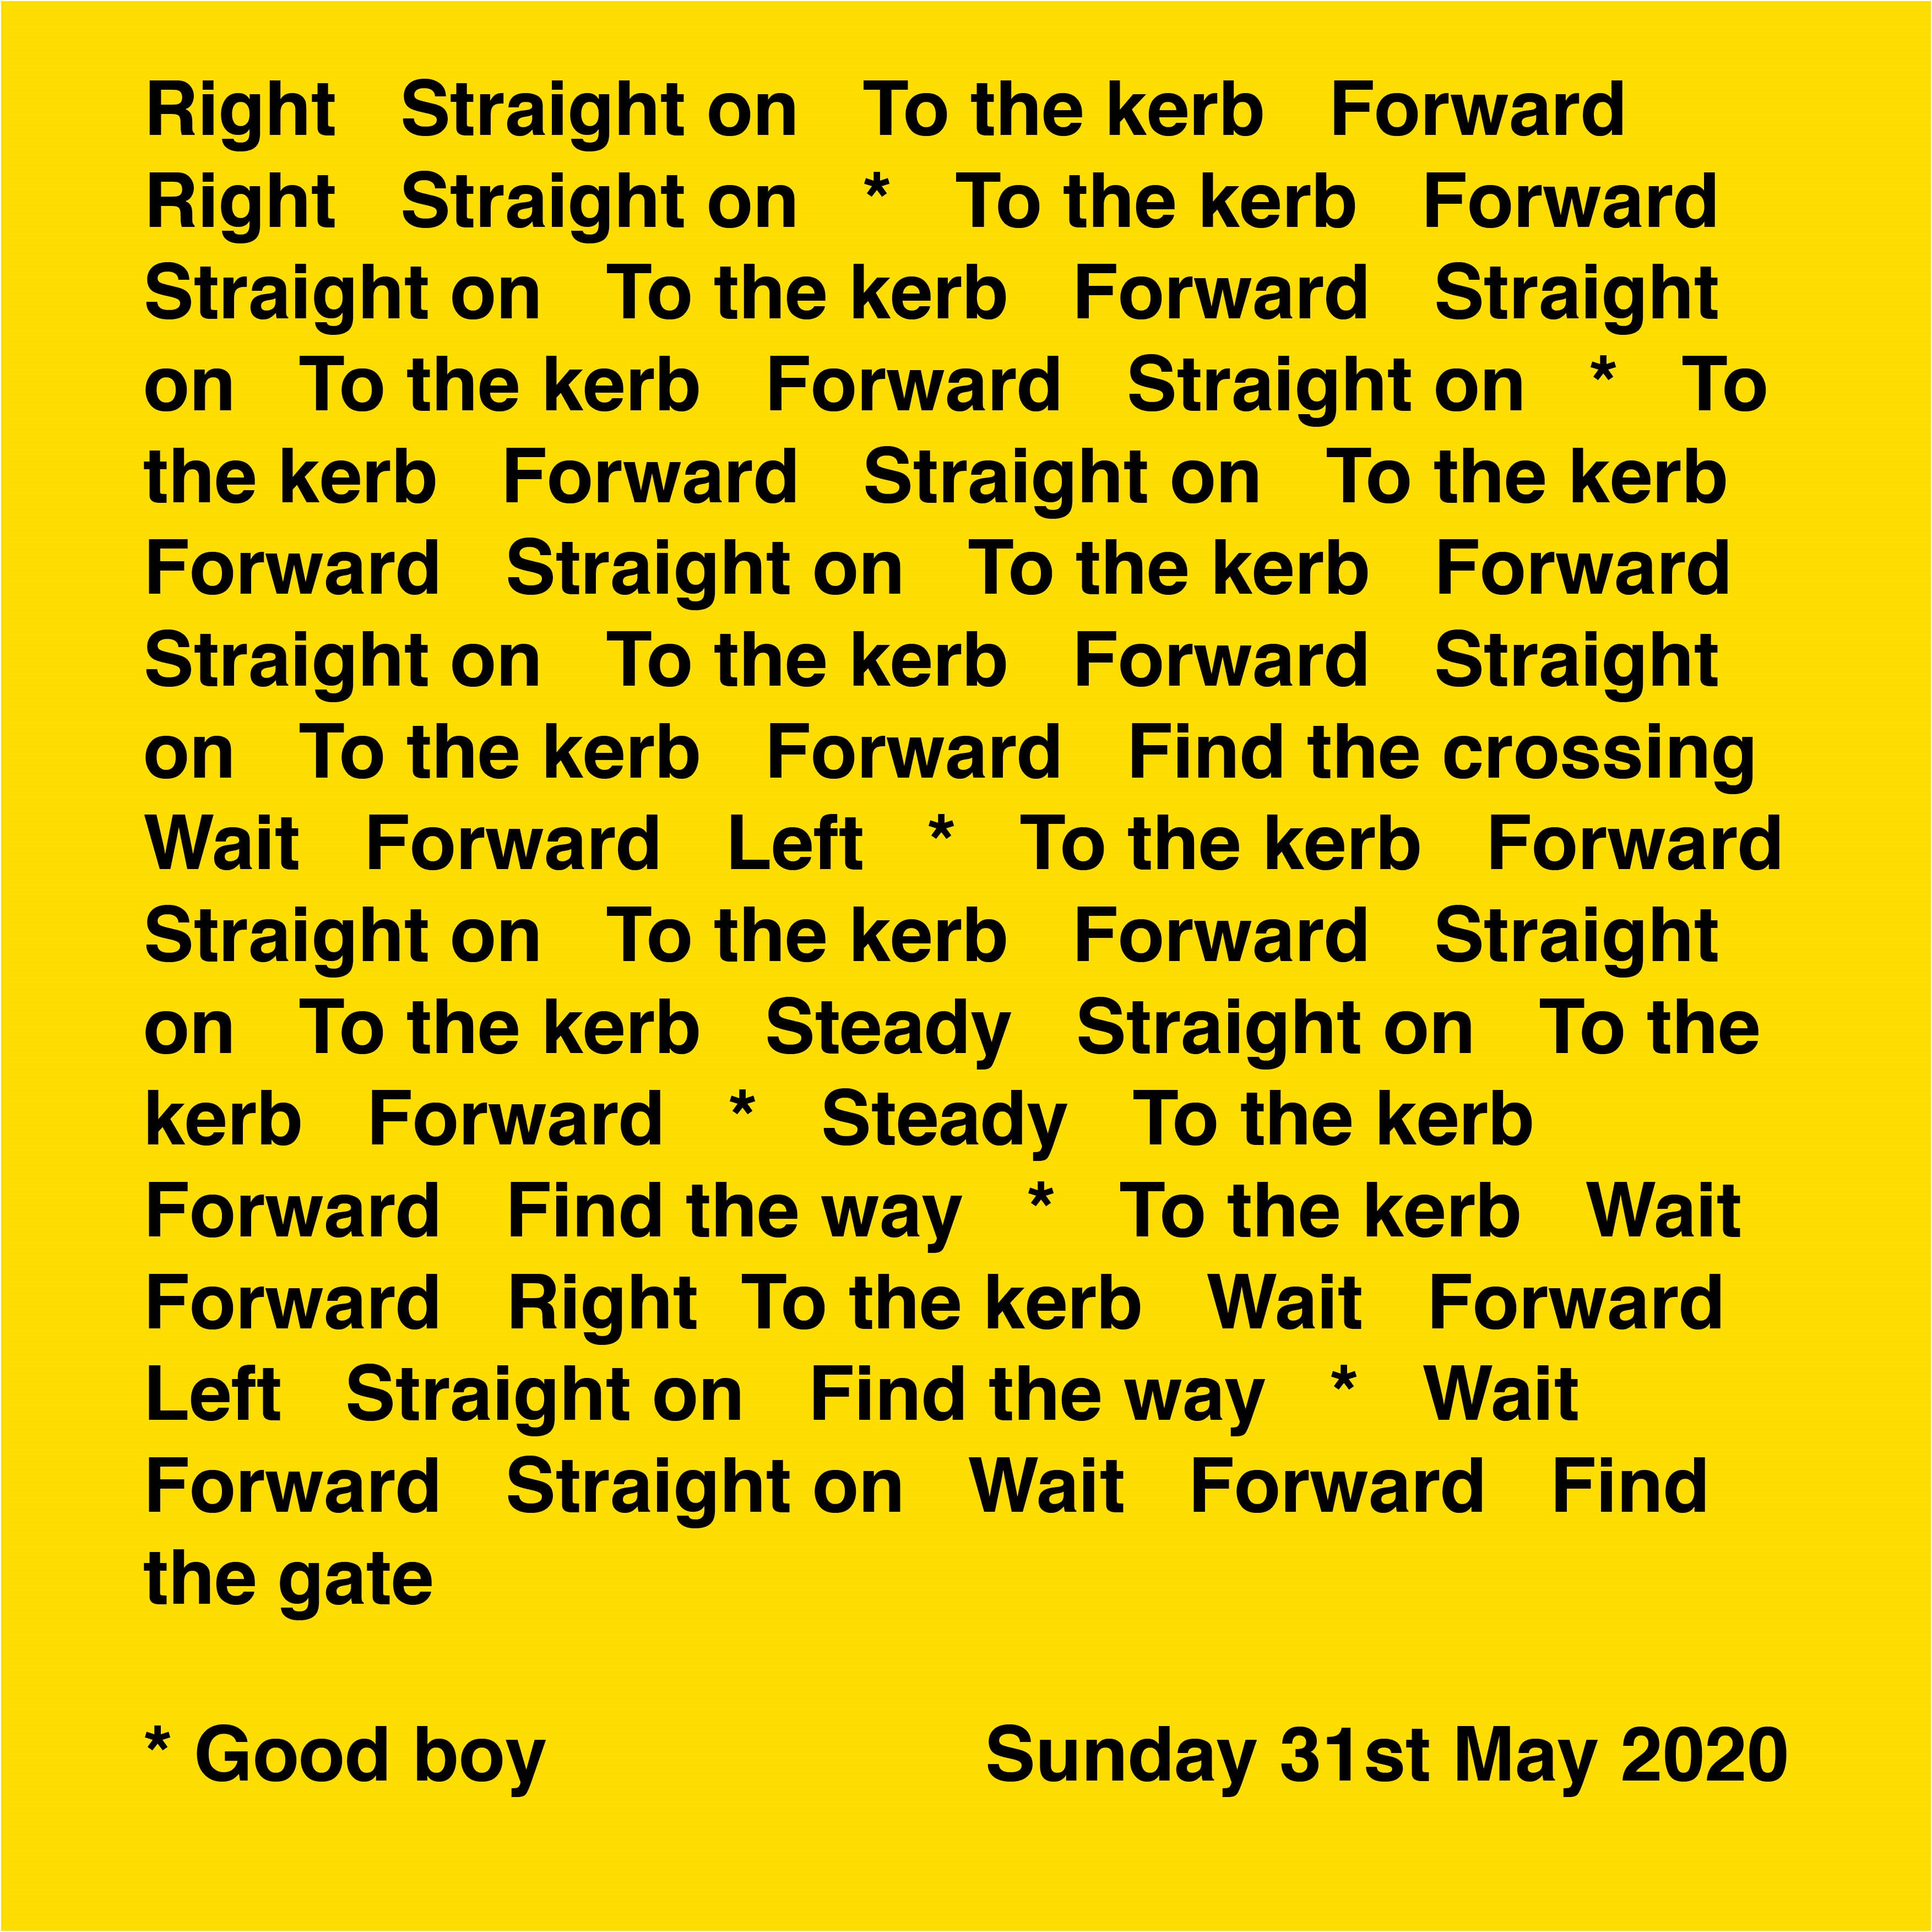 Digital Image - list of commands to Angela's guide dog. Black text on a bright yellow background